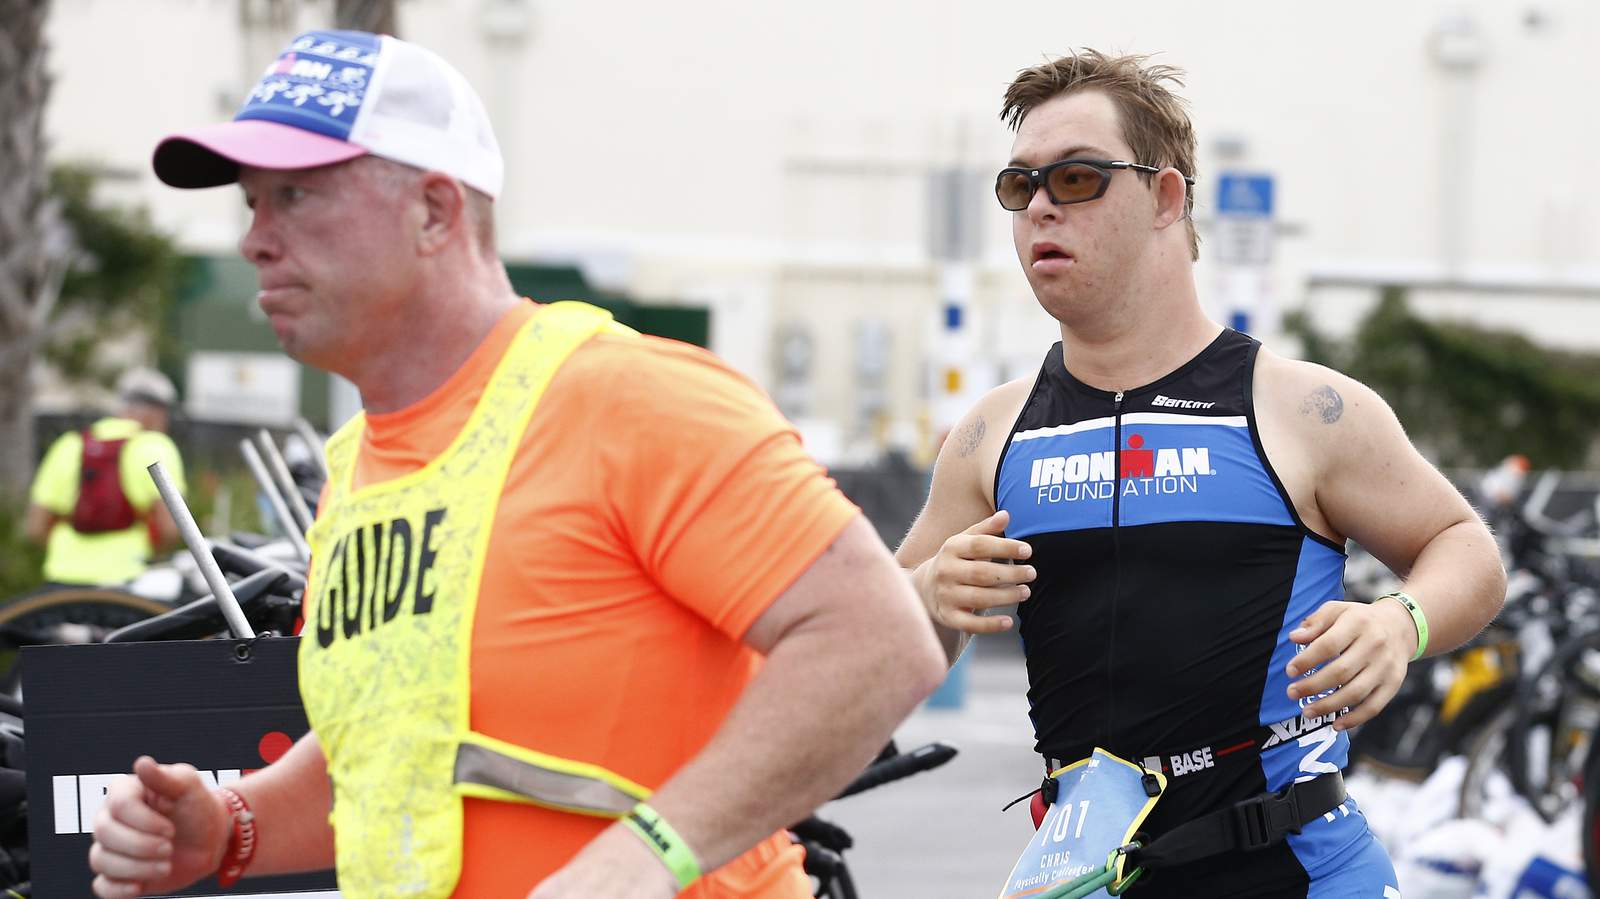 Florida man with Down Syndrome competes in Ironman triathlon